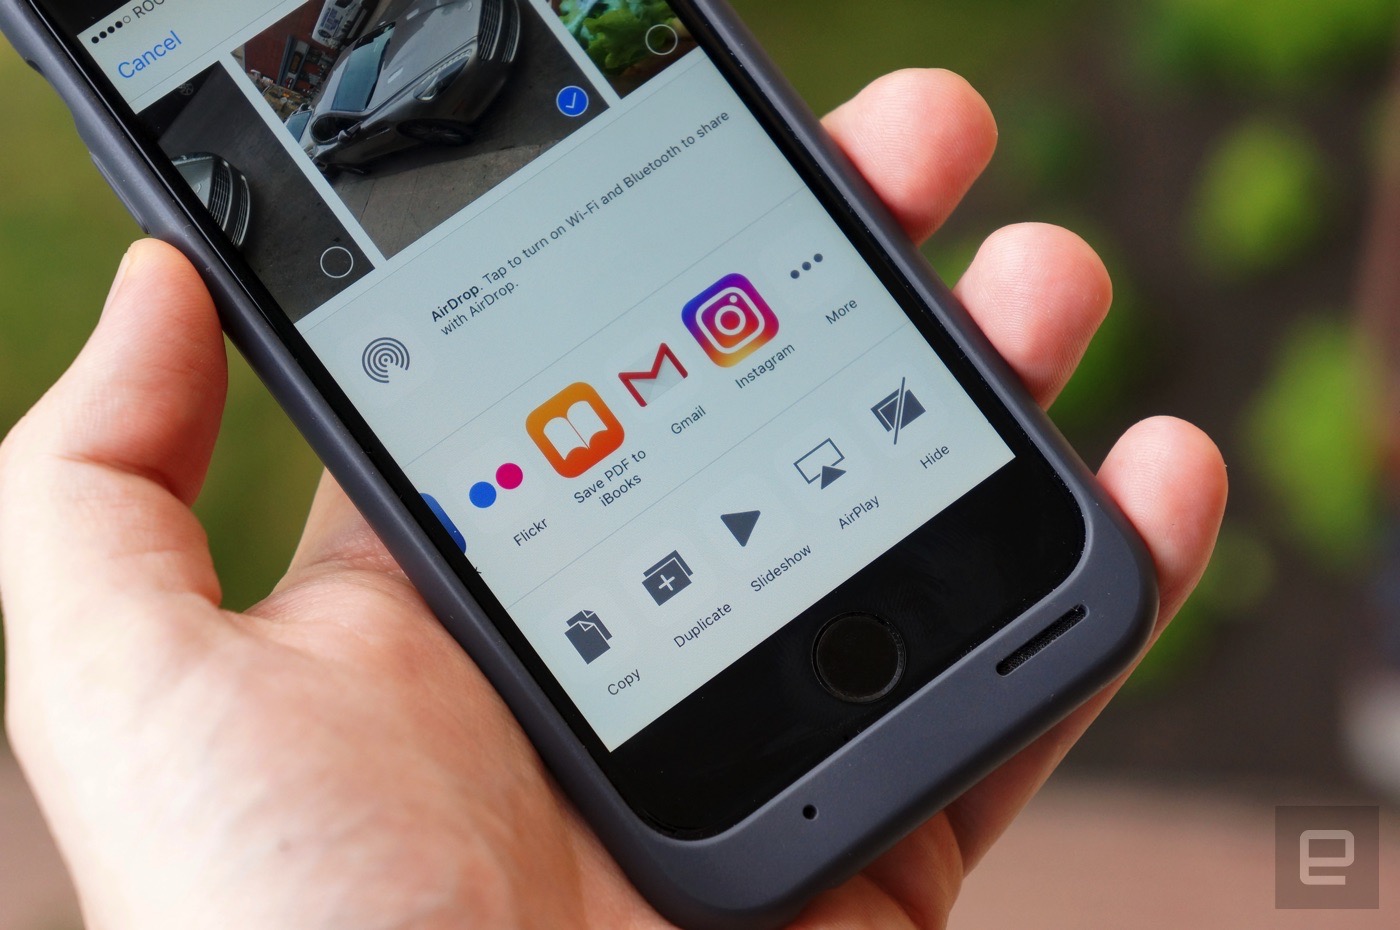 You can finally post to Instagram from other iOS apps